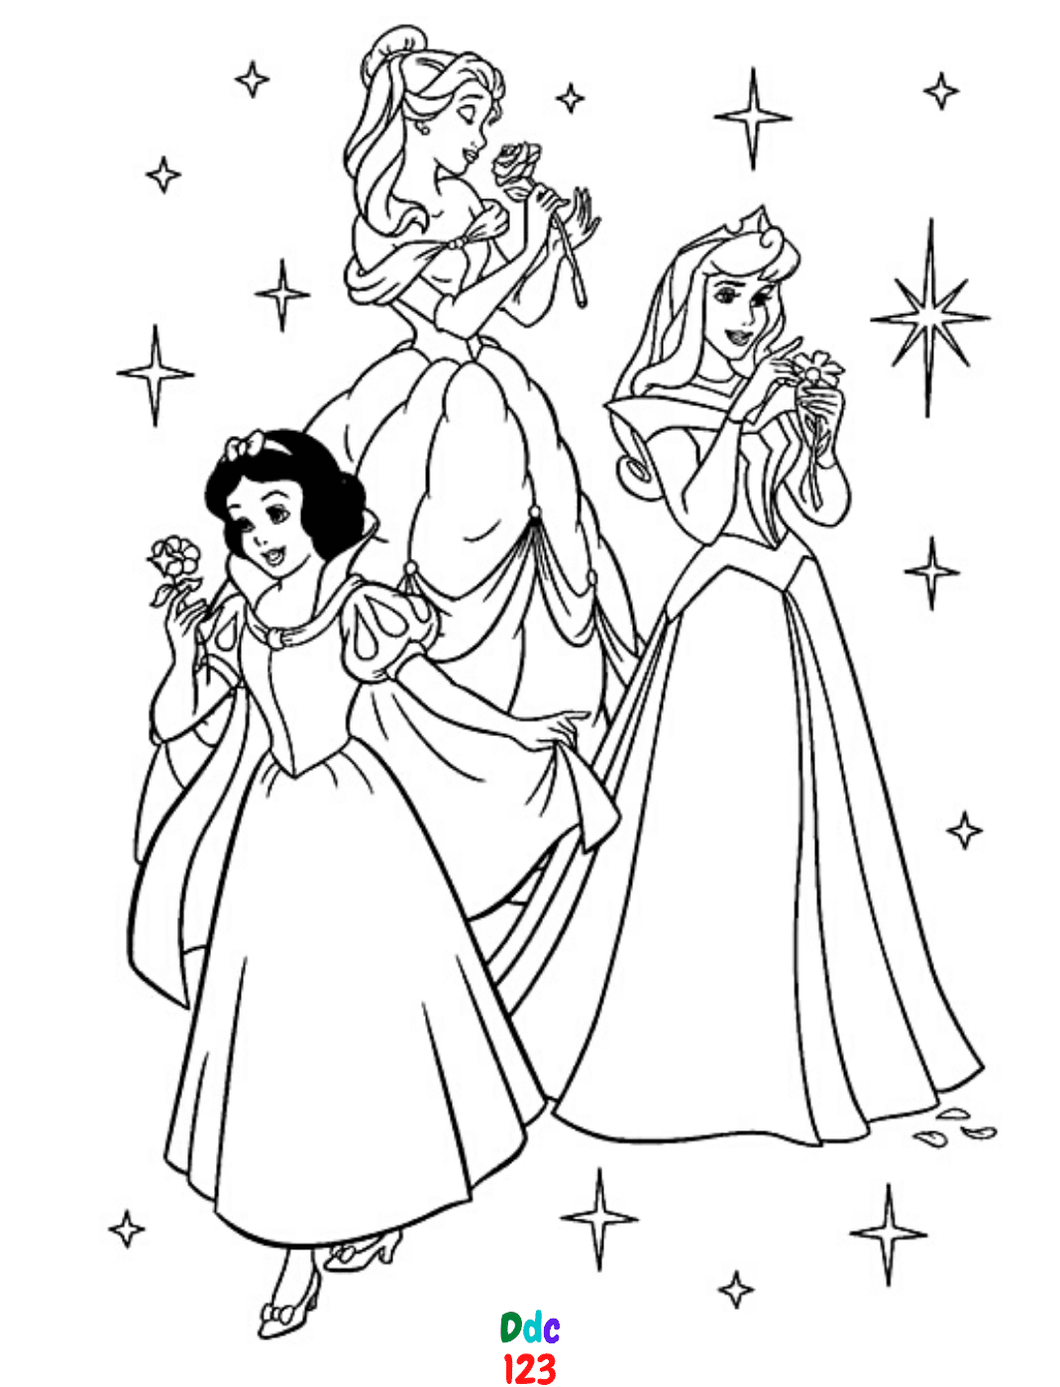 Princess coloring pages to color for kids